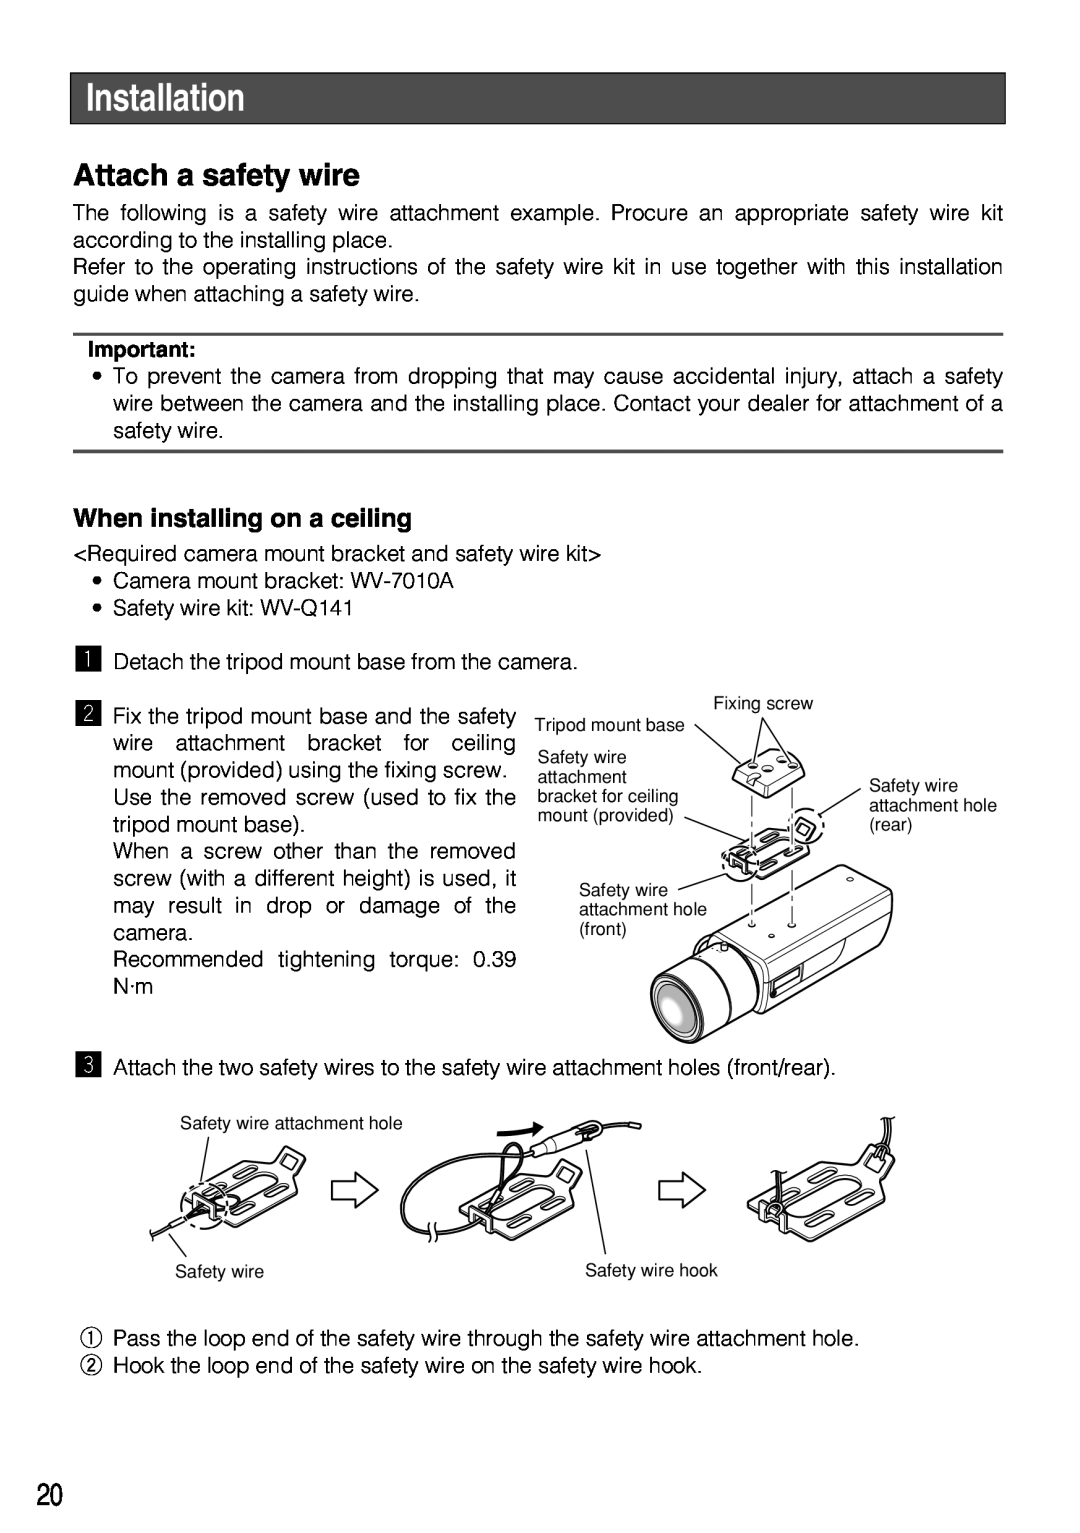 Panasonic WV-NP304 manual Installation, Attach a safety wire, When installing on a ceiling 